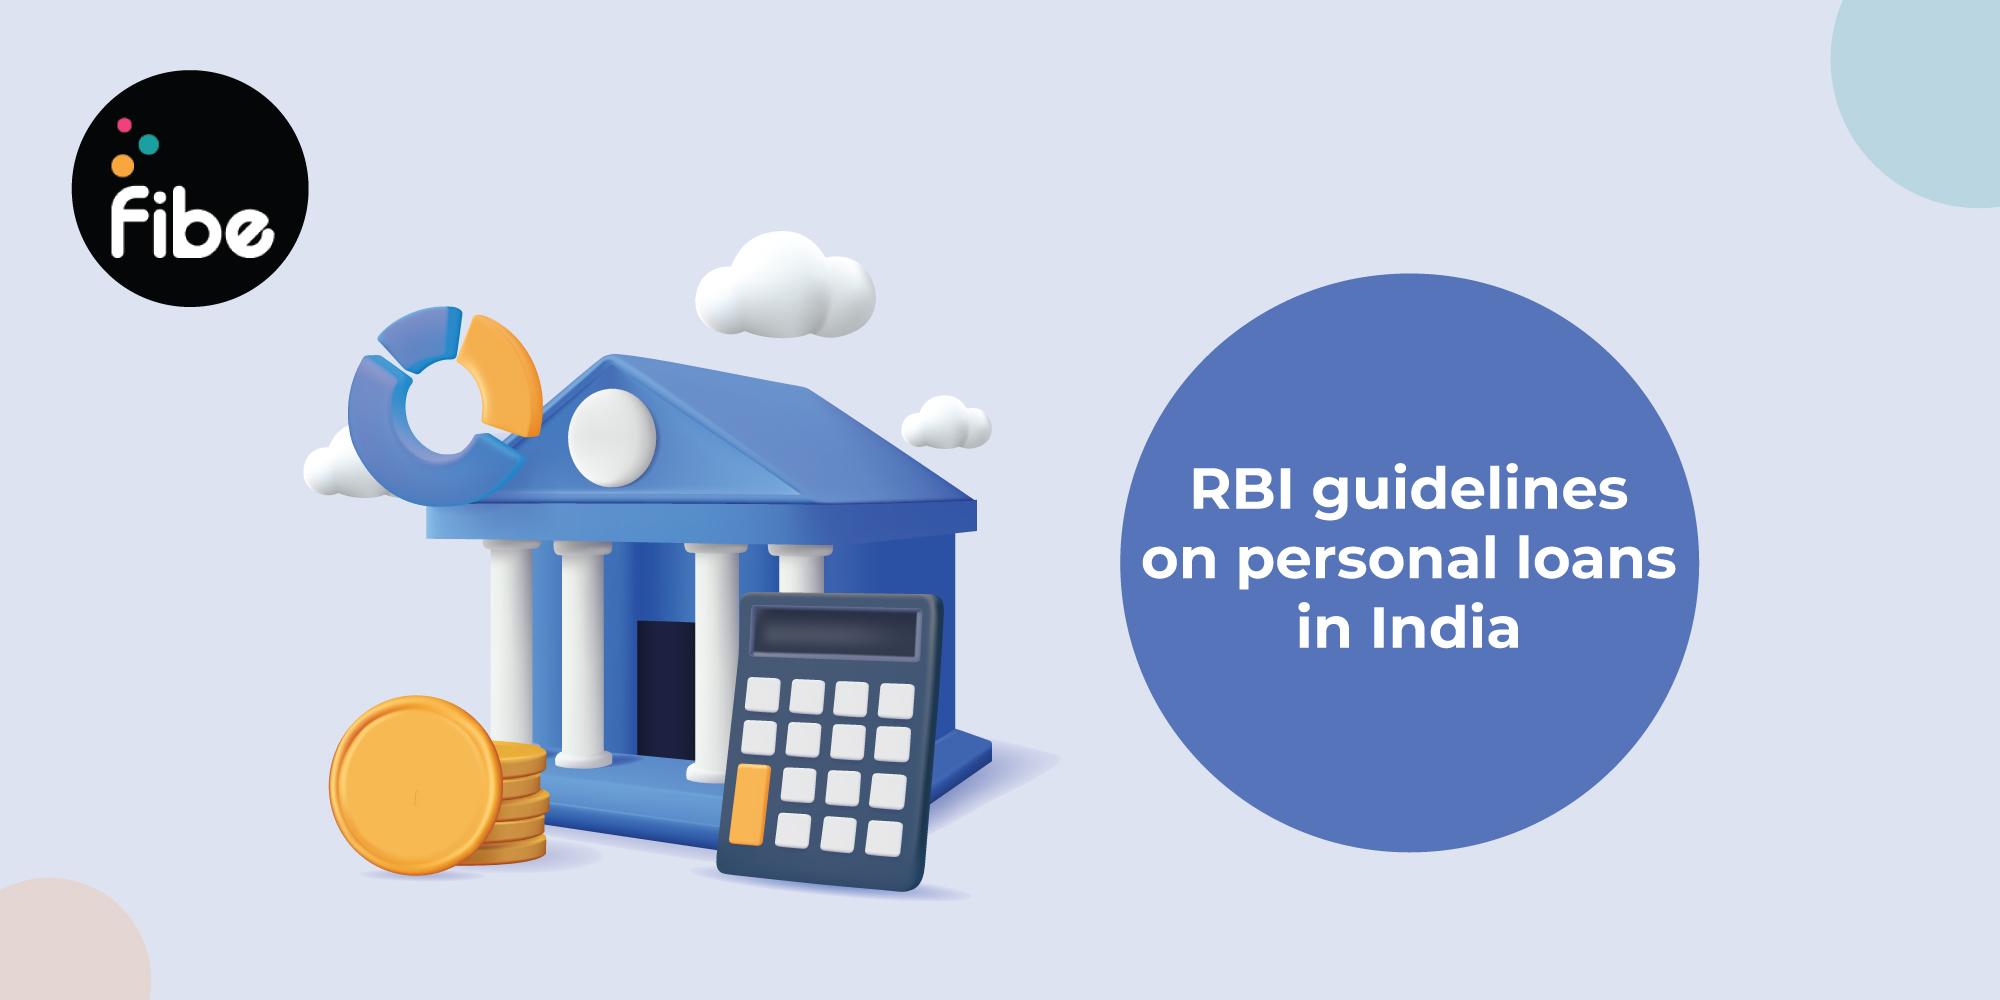 Understanding important personal loan guidelines laid down by the RBI